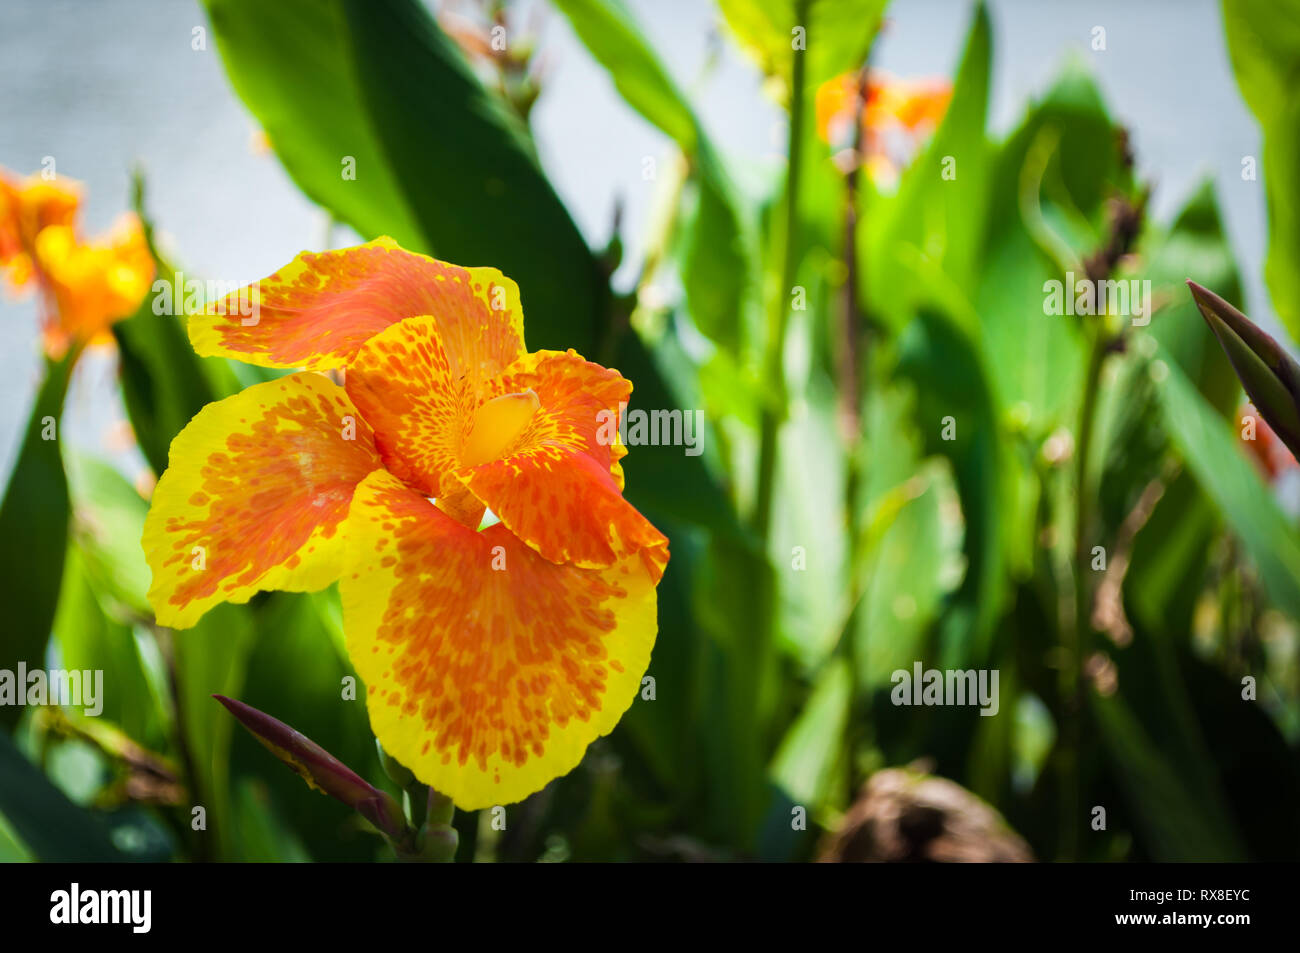 yellow iris flower speckled red orange with green plants background Stock Photo